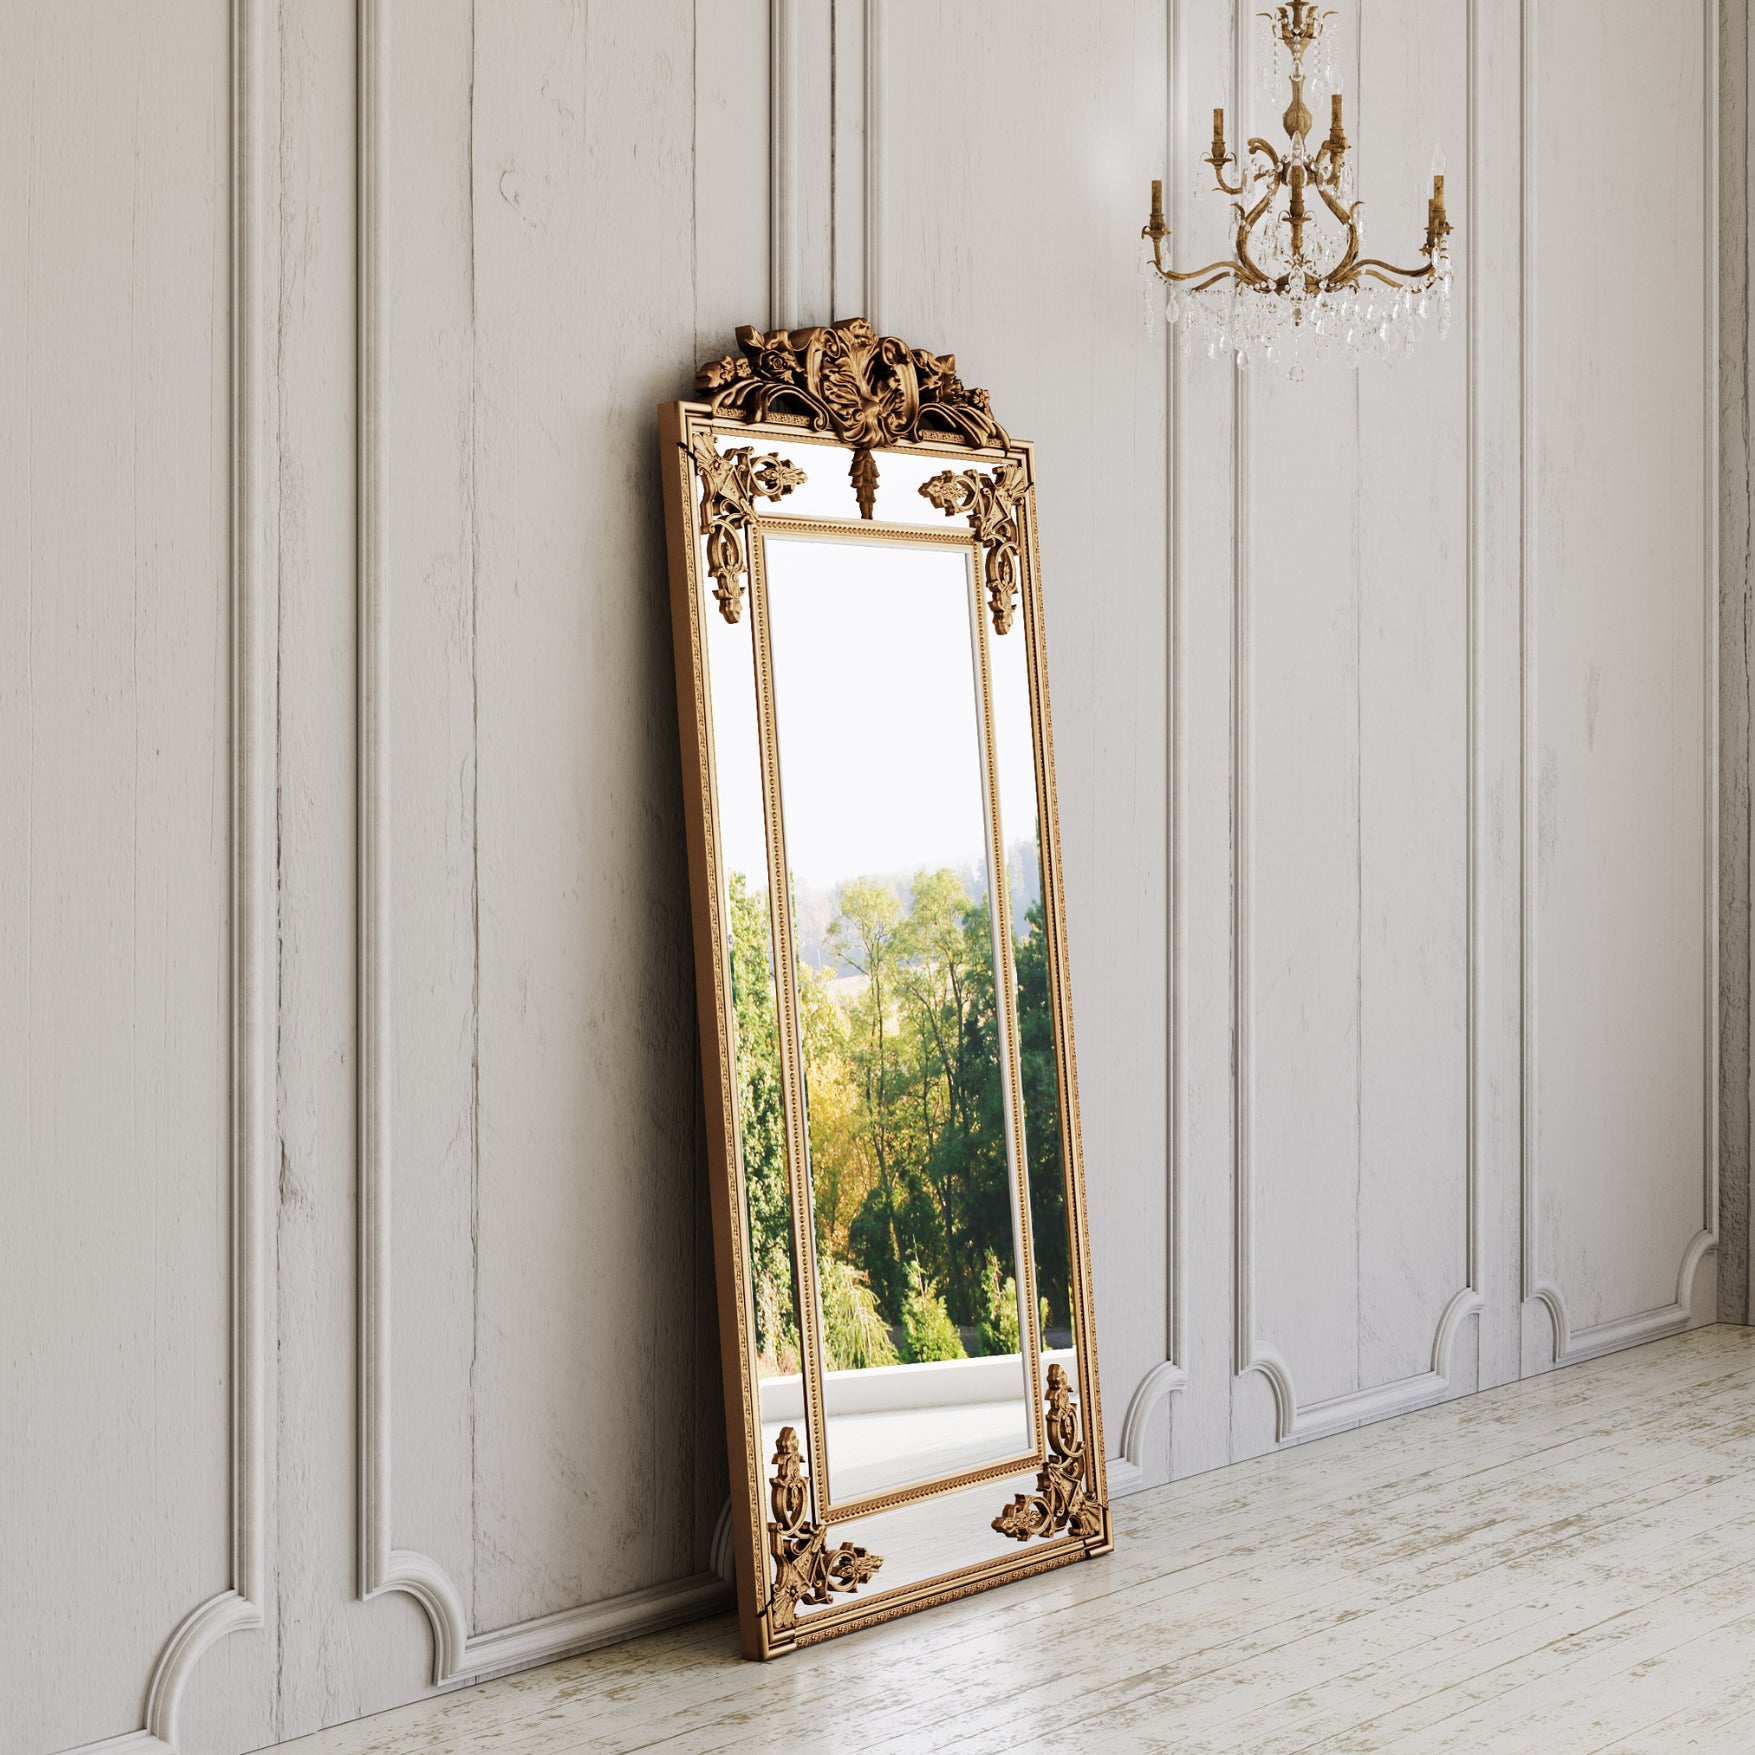 Fleury Mirror: French Gilt Gold Floor Mirror with Intricate Carvings-Manoir